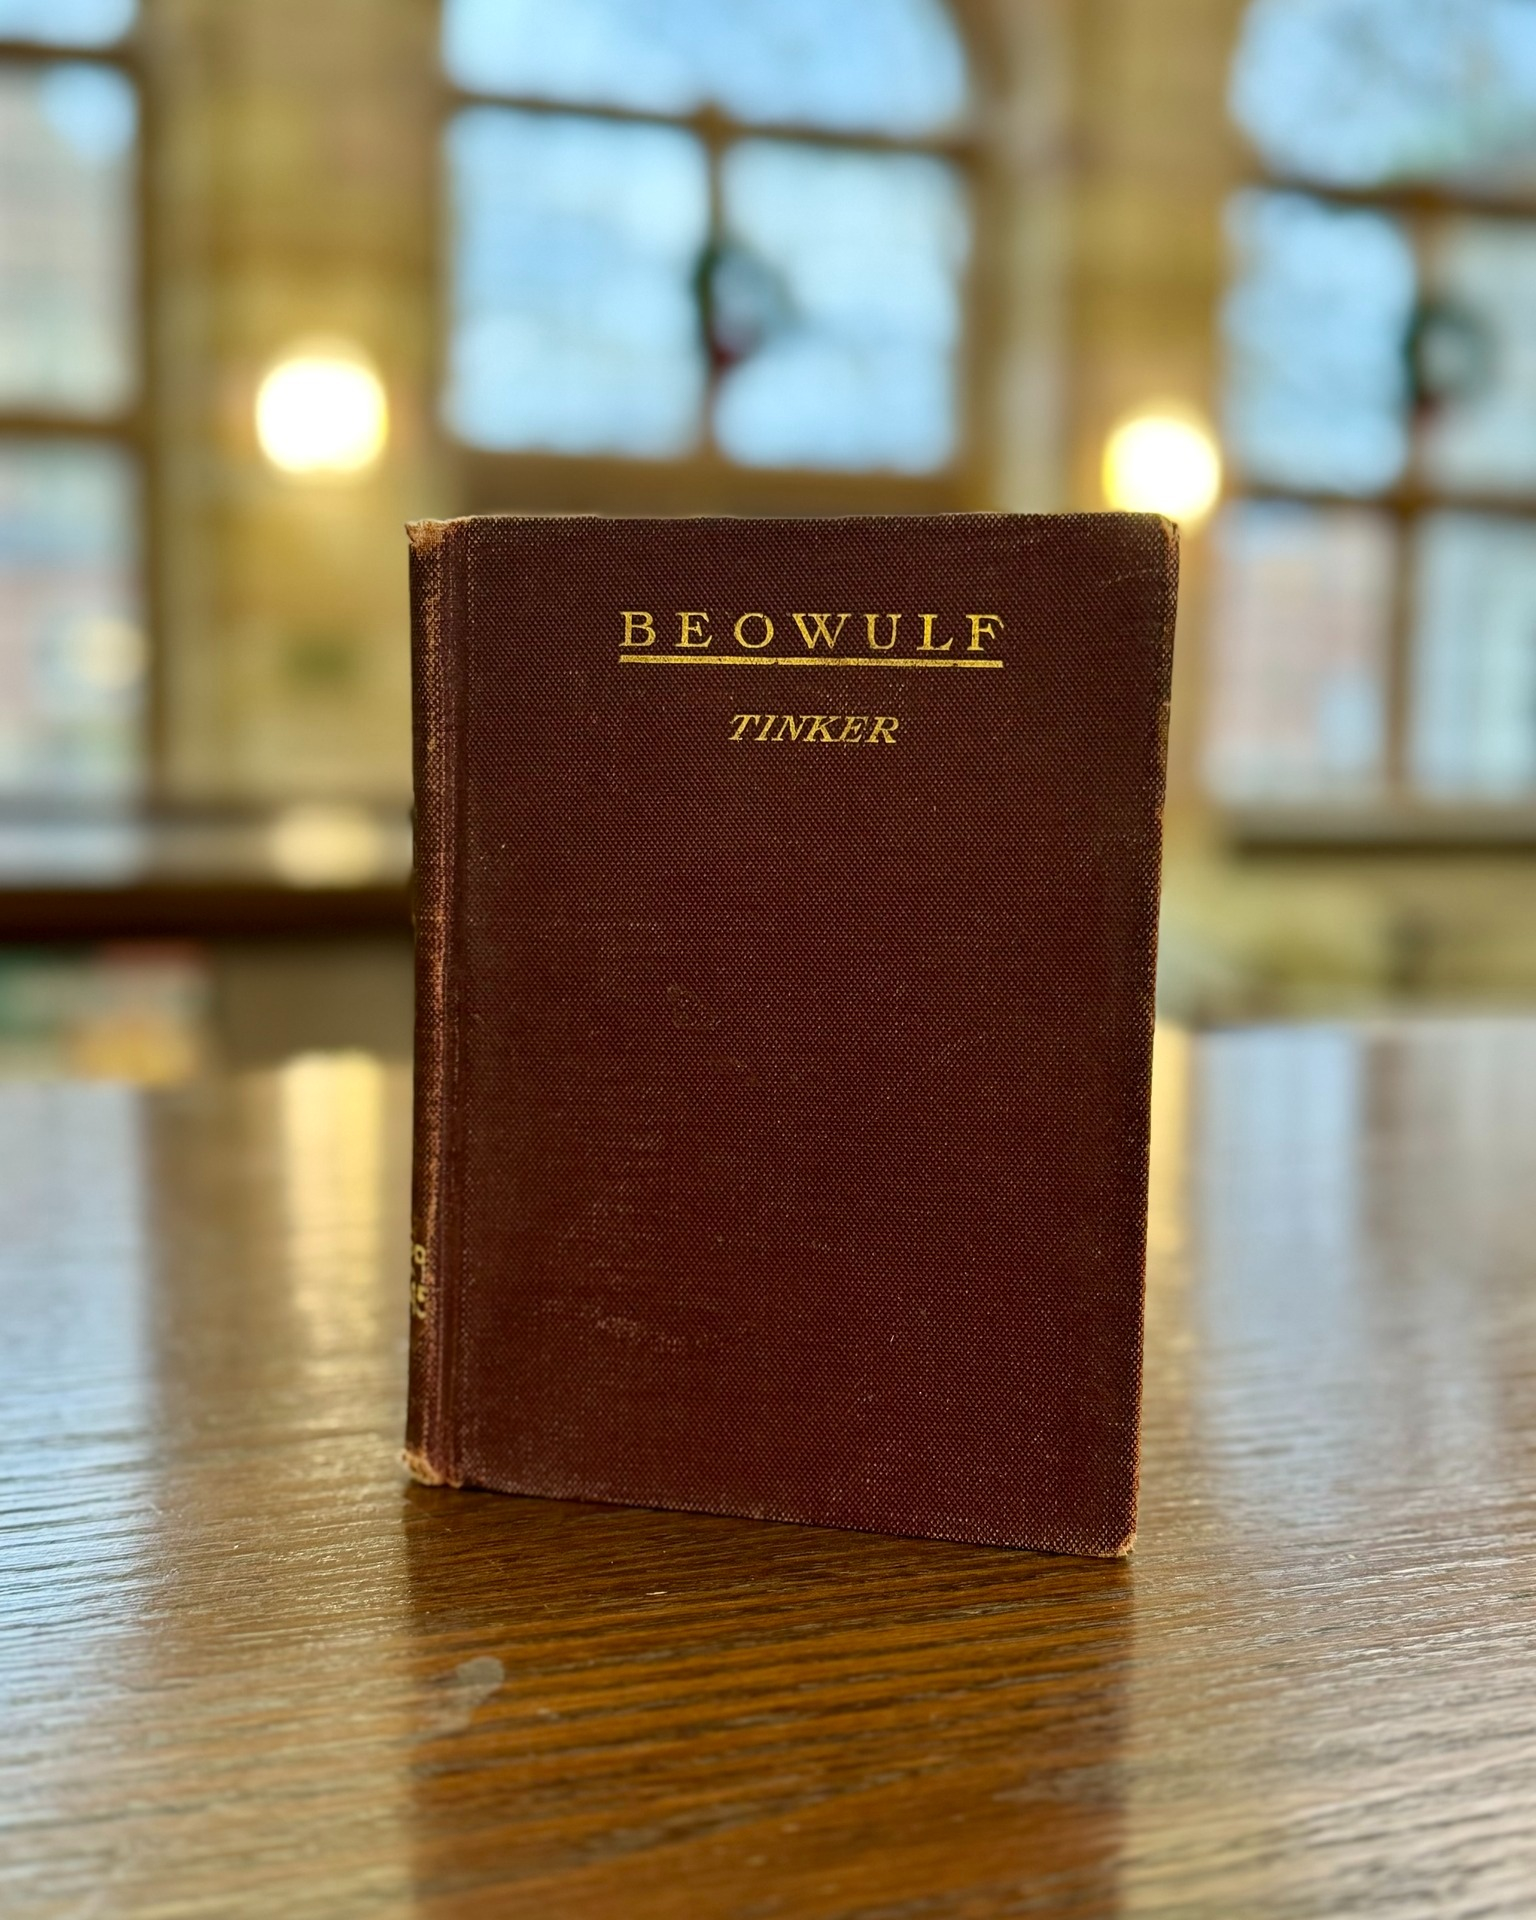 The copy of Beowulf that was returned to Sewickley Public Library after 54 years.